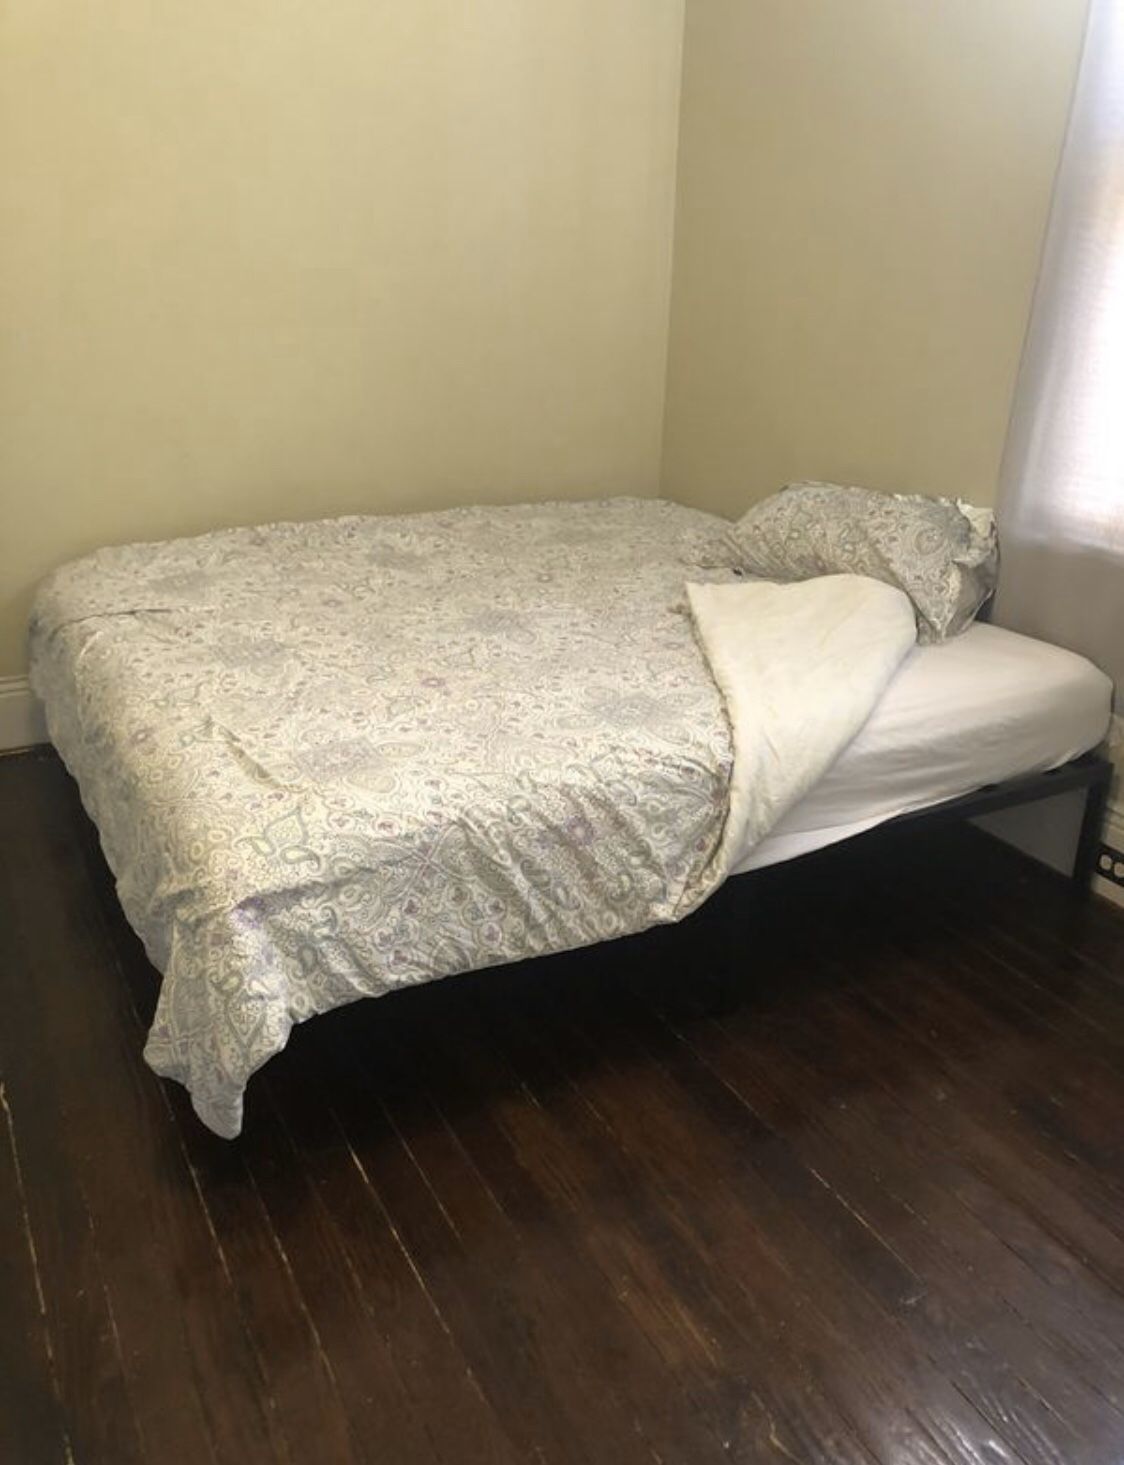 King size bed with frame $50 to deliver